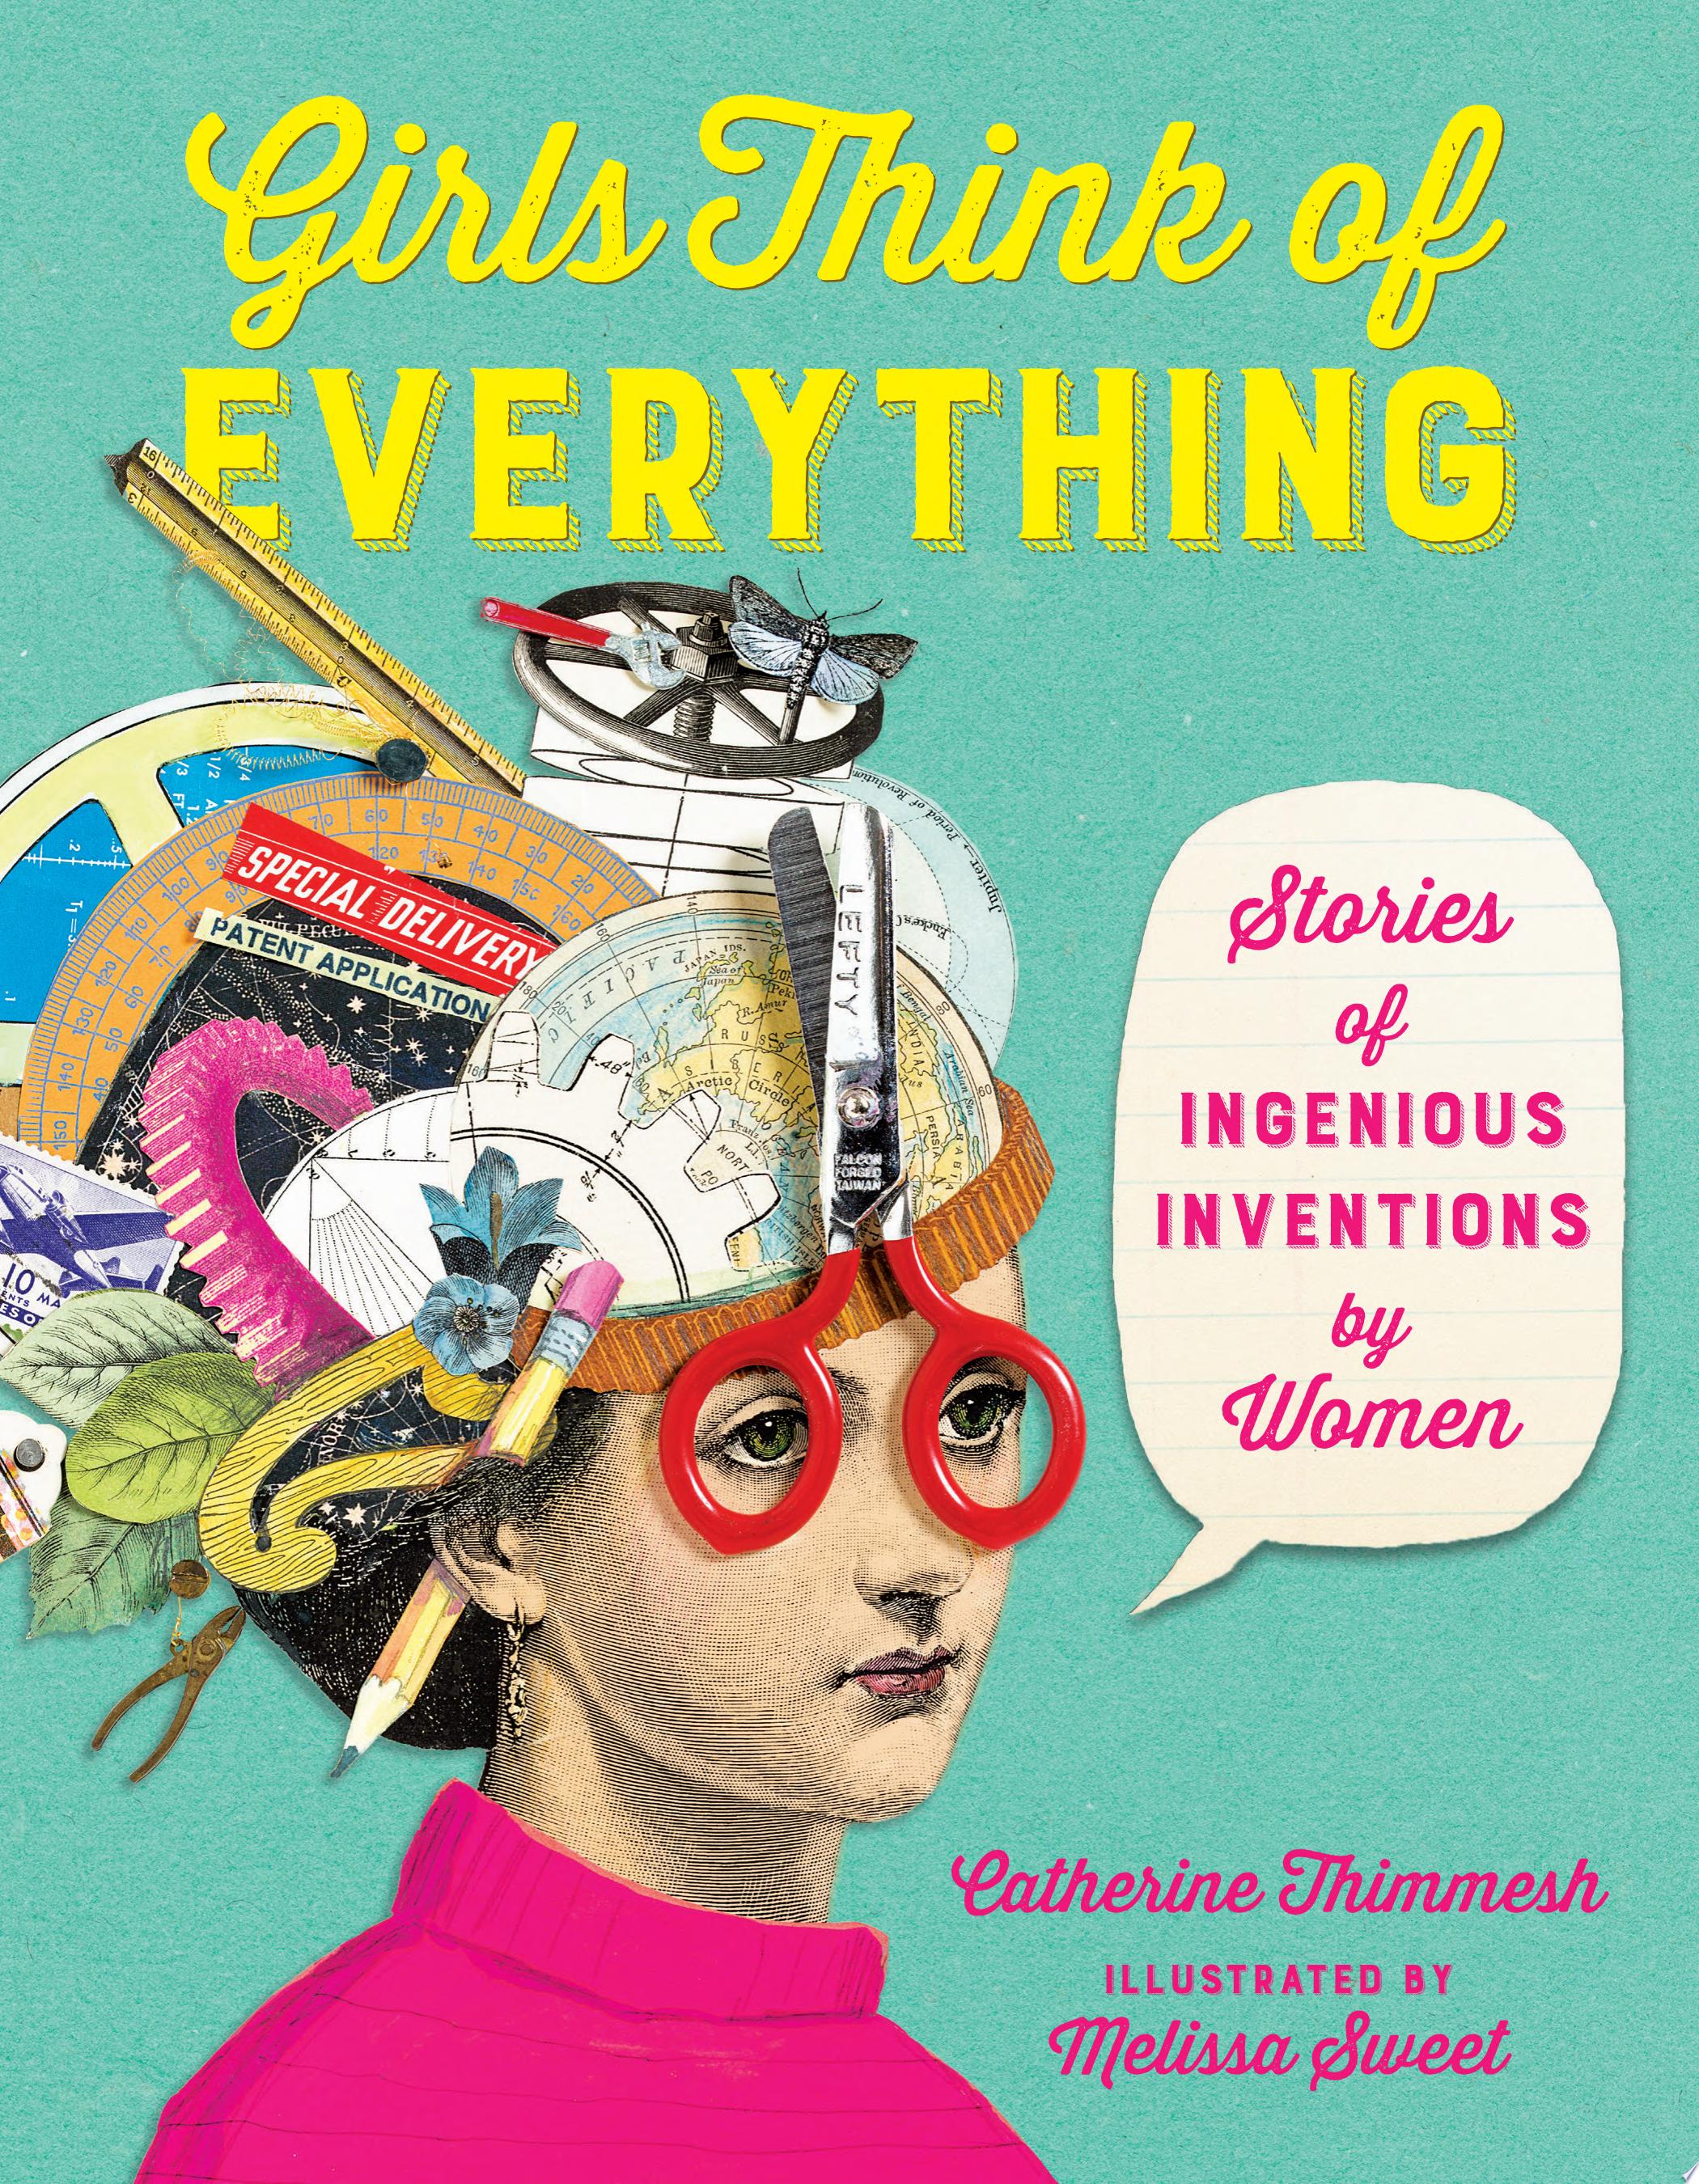 Book Cover for "Girls Think of Everything"